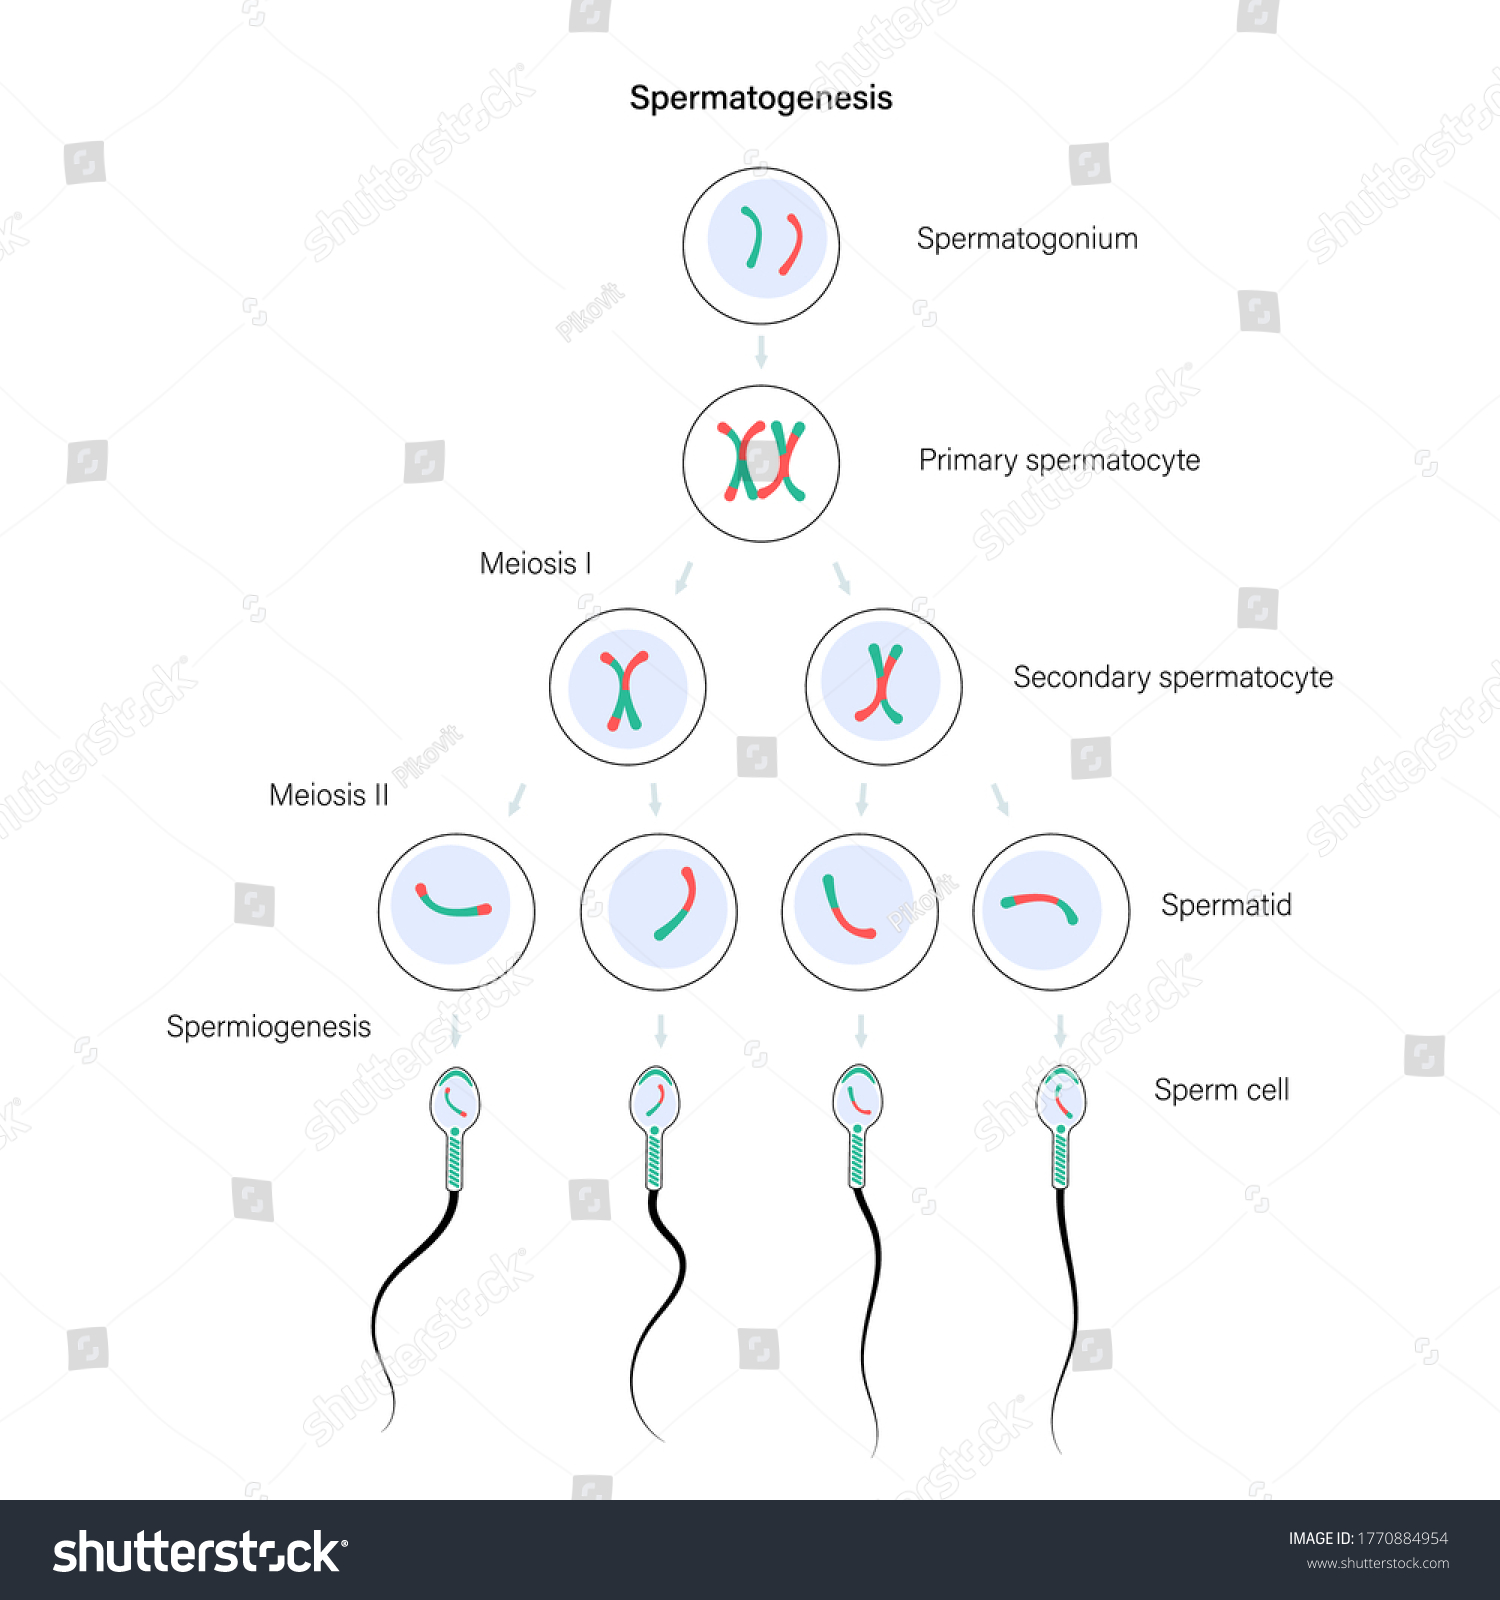 Spermatogenesis Cell Division Diploid Cells Dna Stock Vector Royalty Free 1770884954 